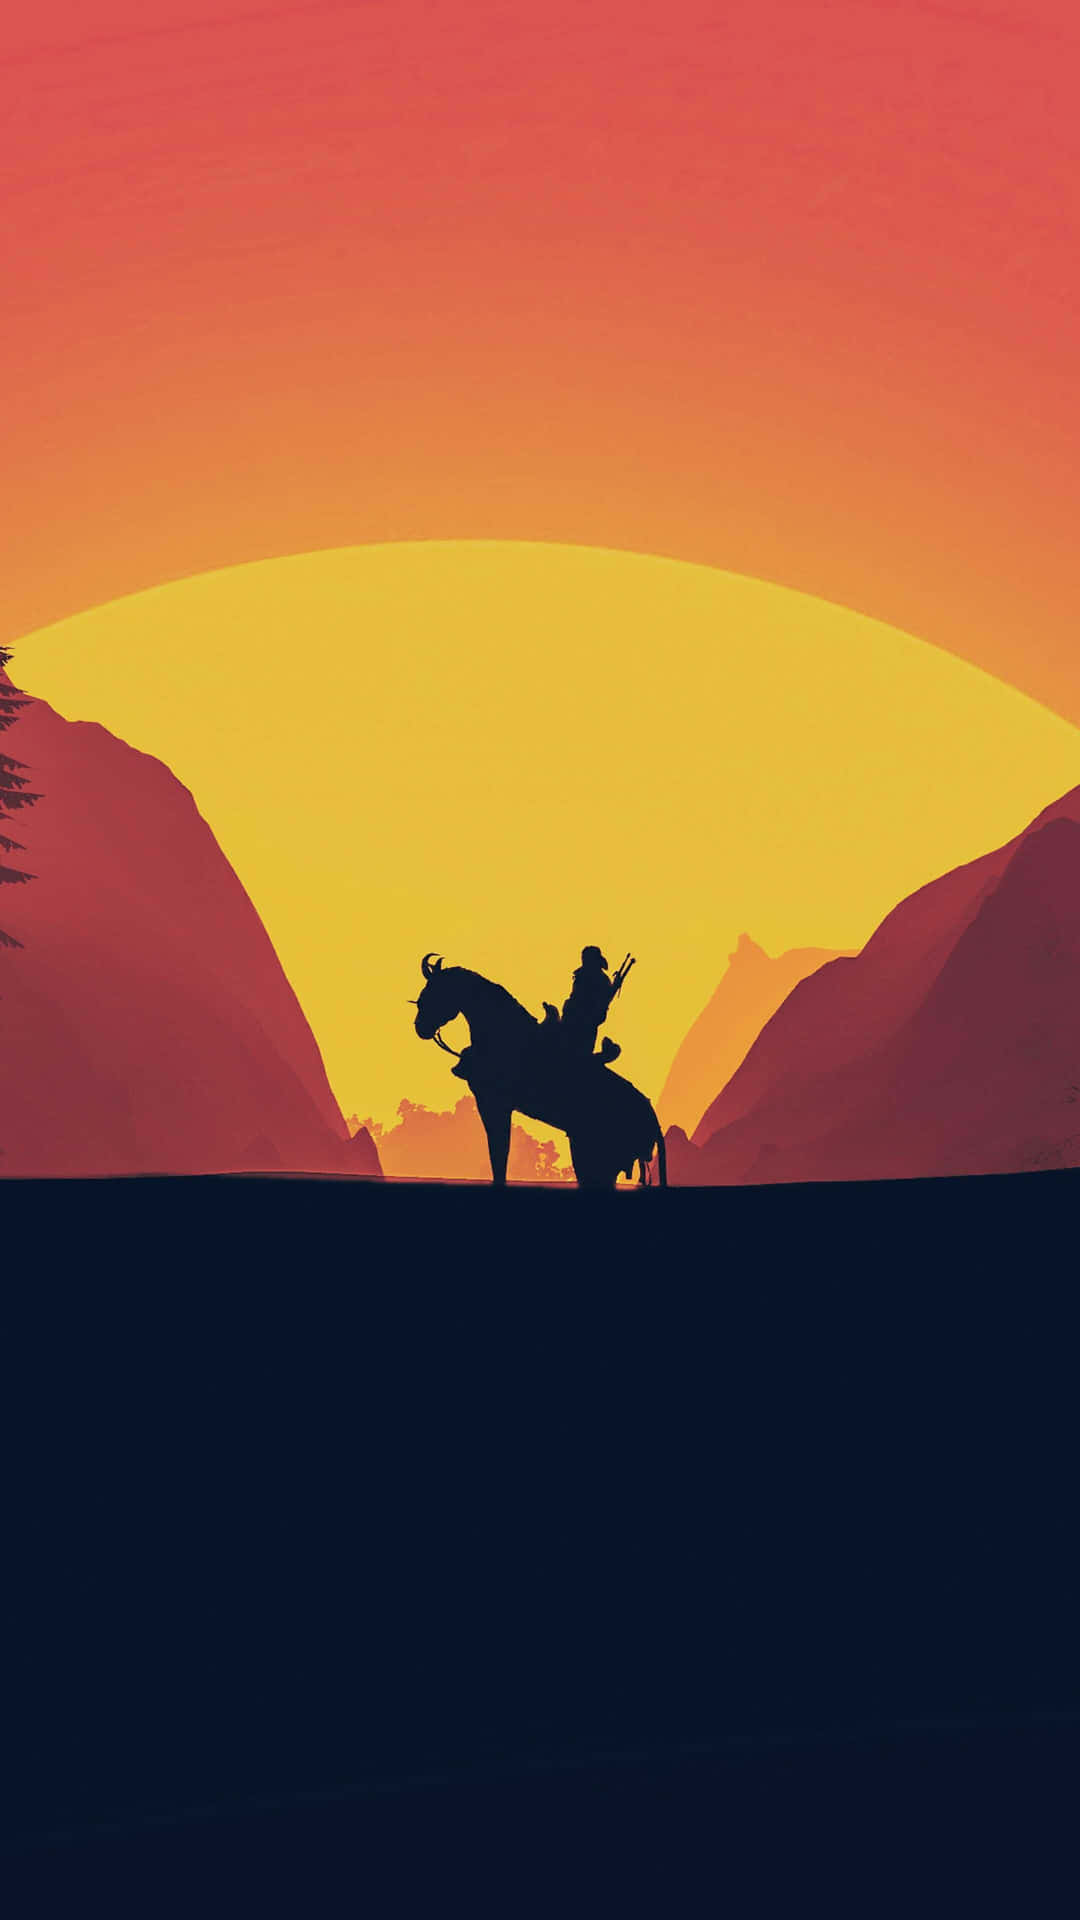 "sunset Silhouette Of A Cowboy"